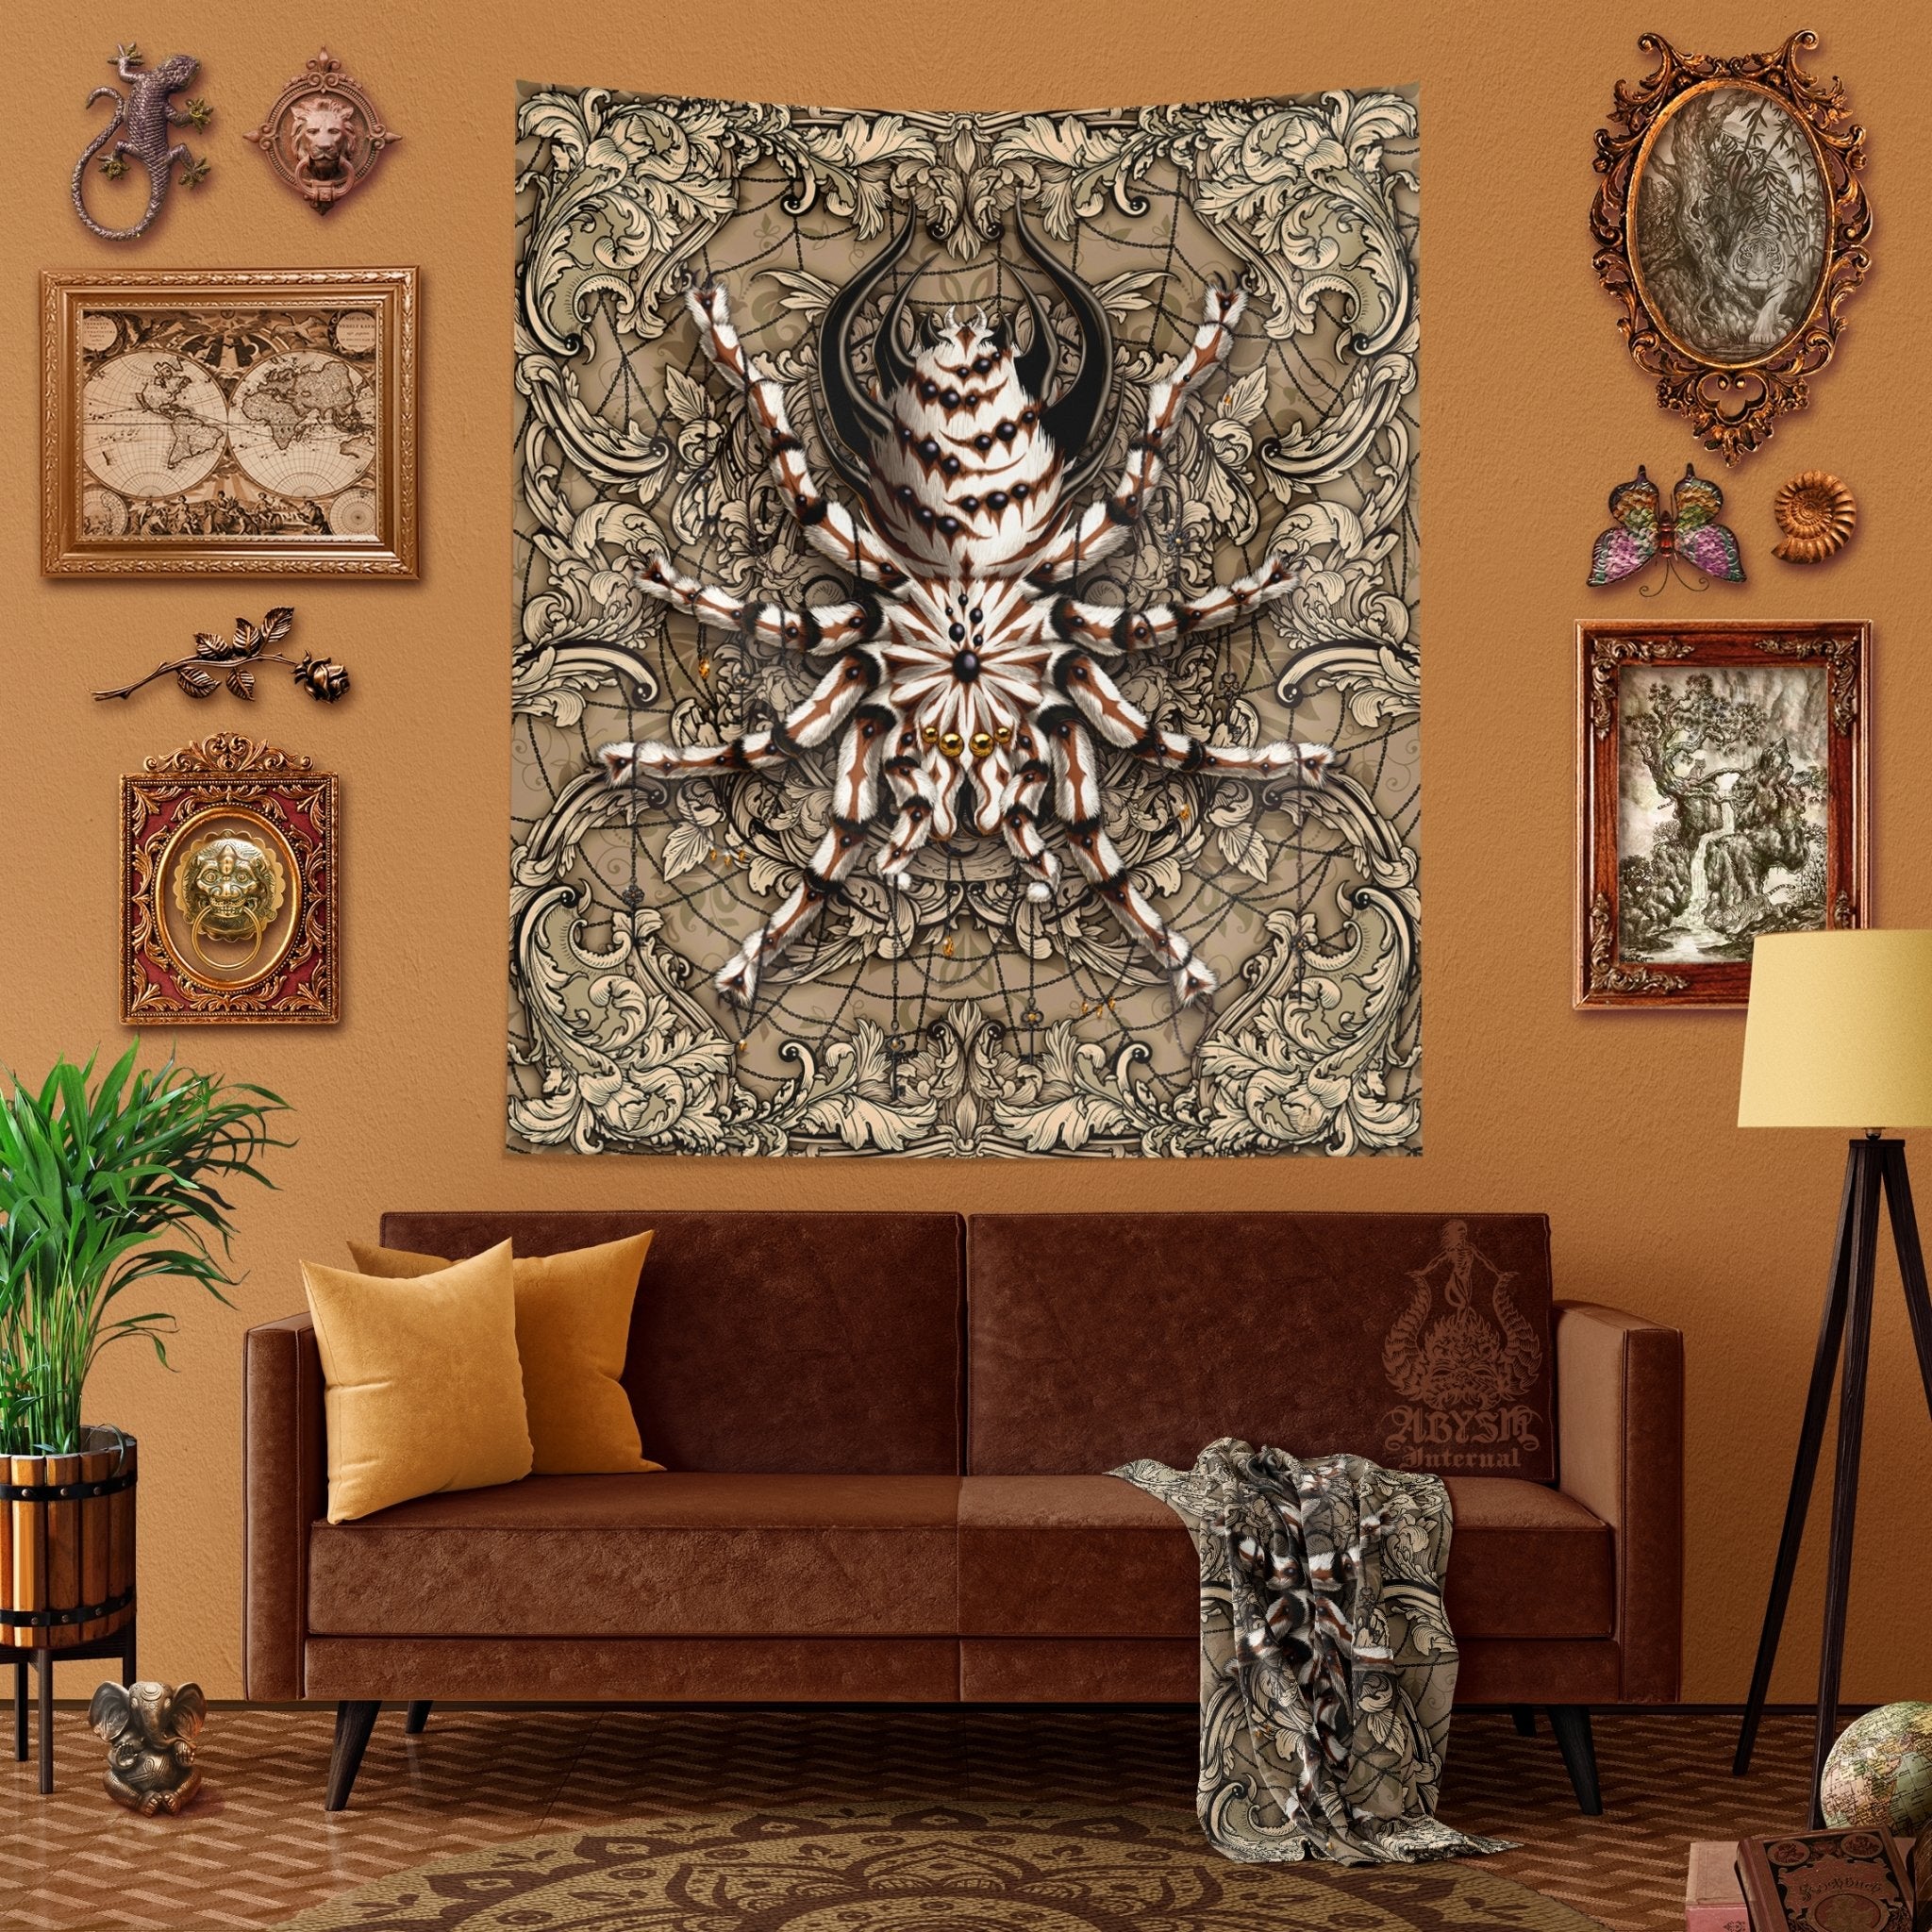 Spider Tapestry, Indie Wall Hanging, Alternative Home Decor, Tarantula Art Print, Eclectic and Funky - Cream - Abysm Internal